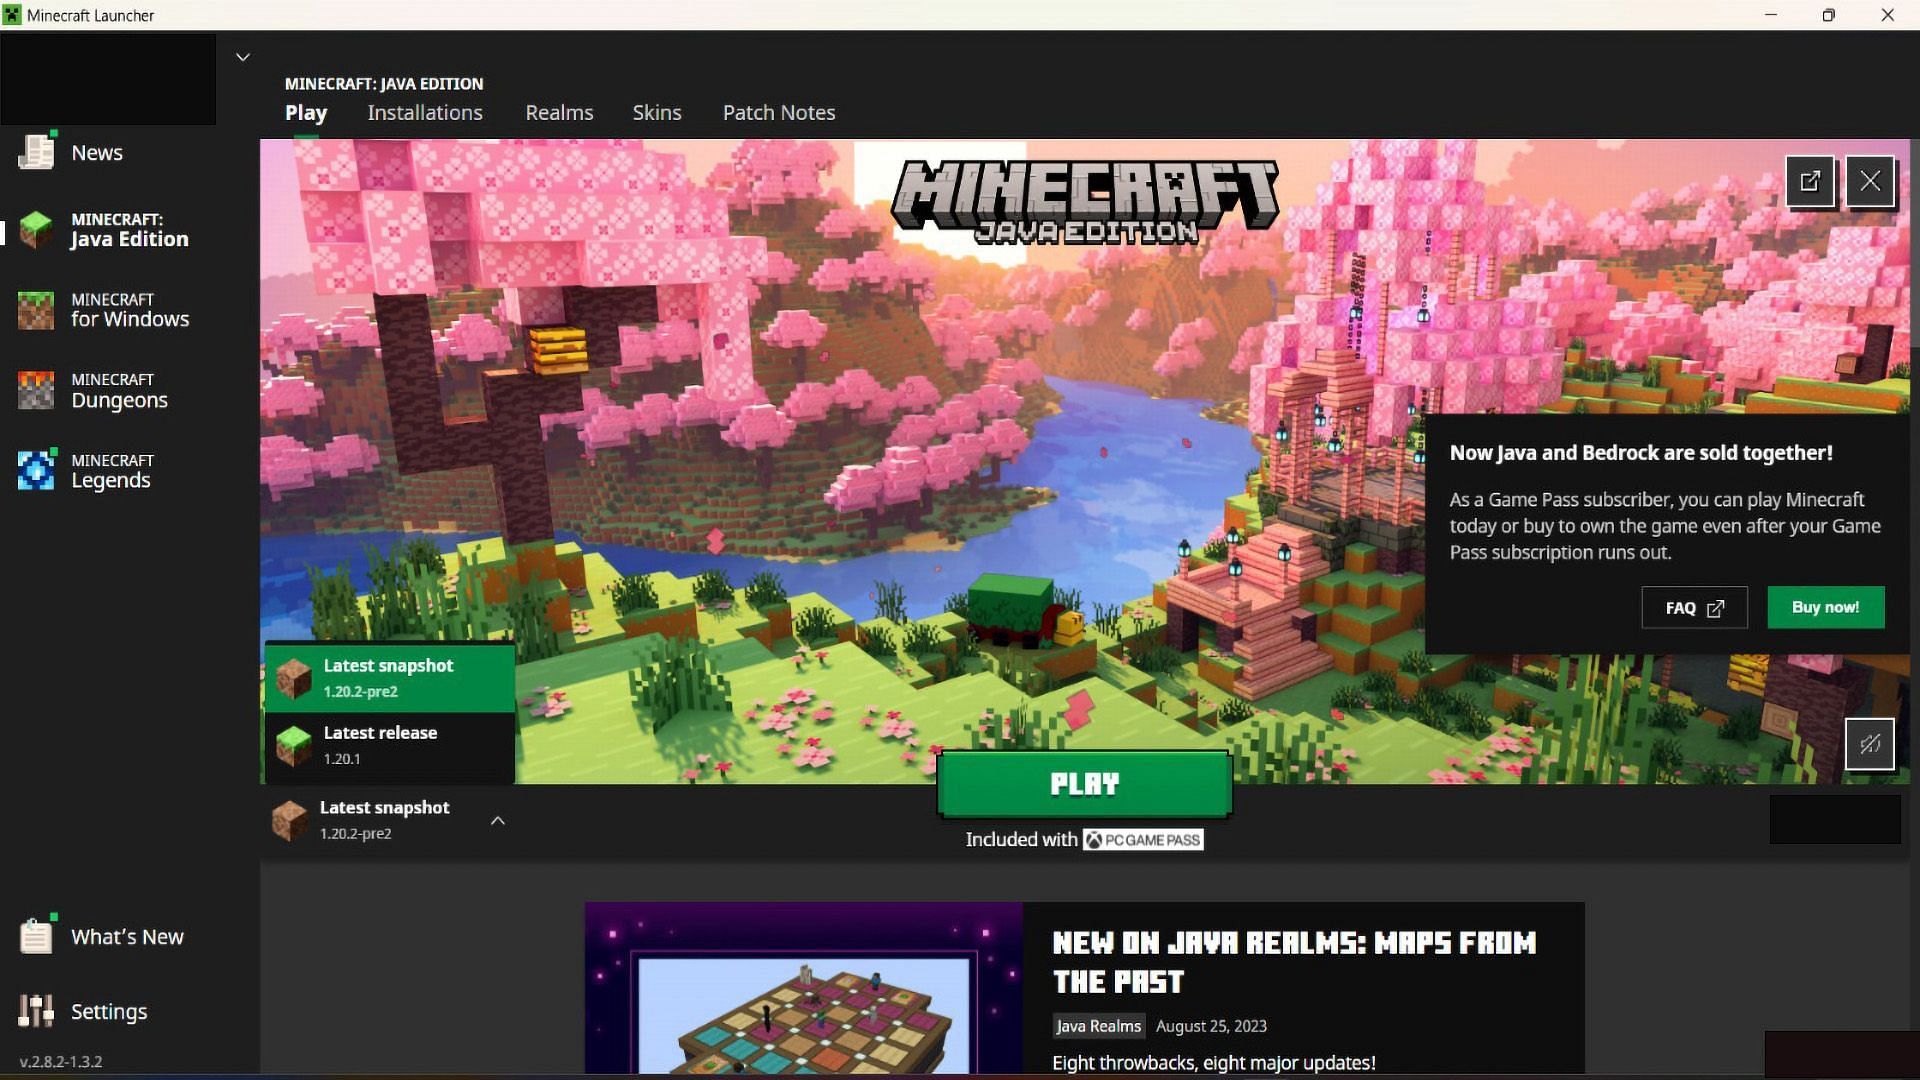 Enjoy the new Minecraft features on your device before the official release (Image via Minecraft Launcher)